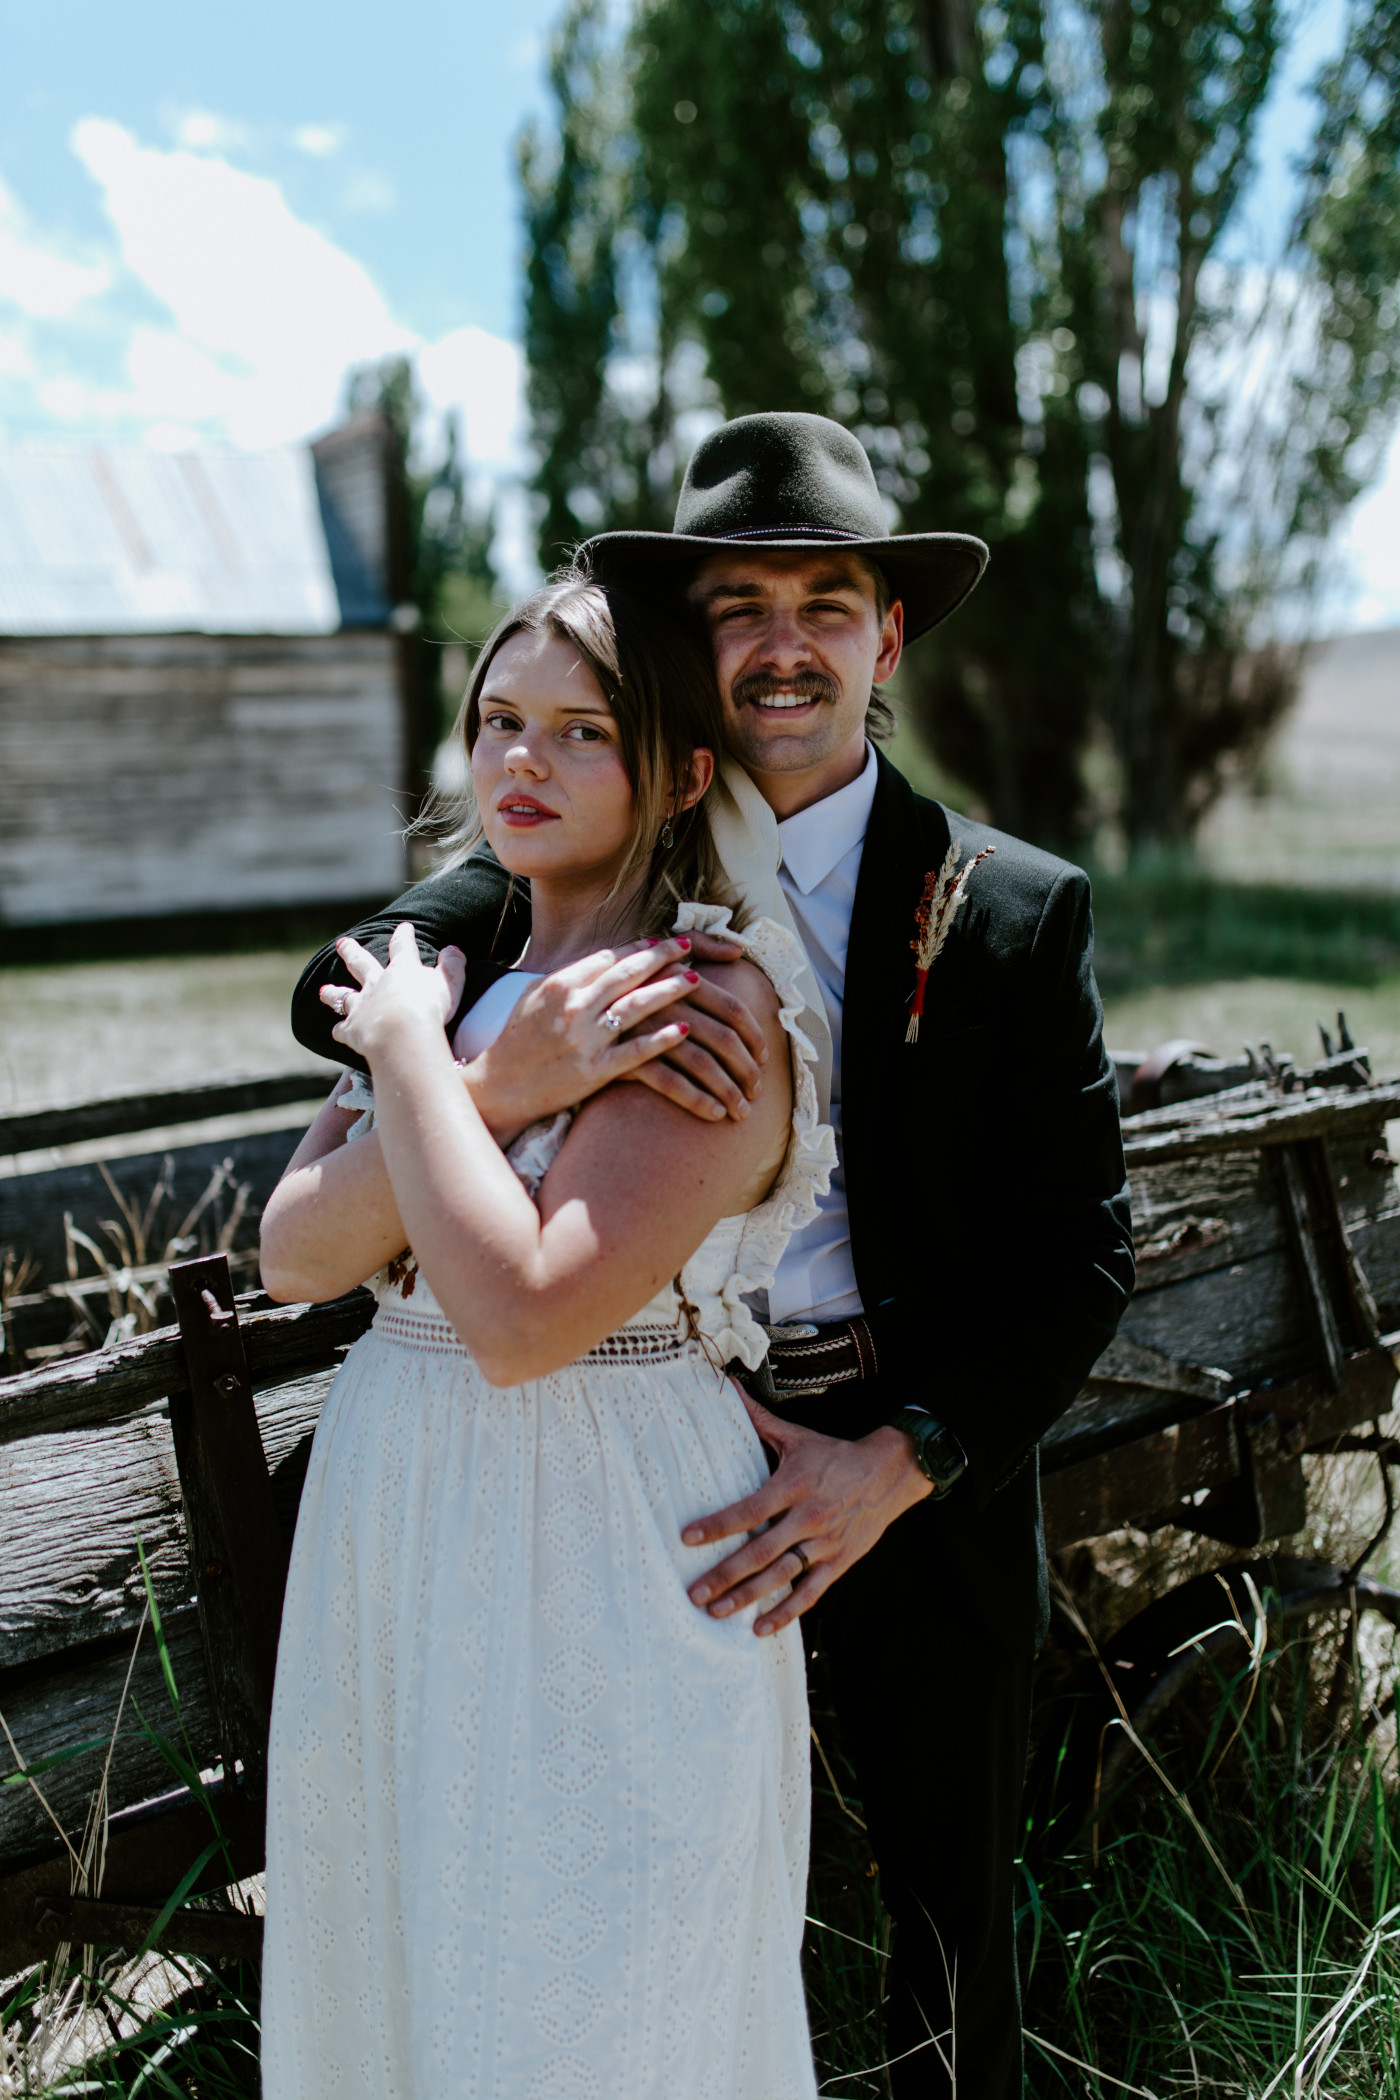 Emily and Greyson hug. Elopement photography in the Central Oregon desert by Sienna Plus Josh.